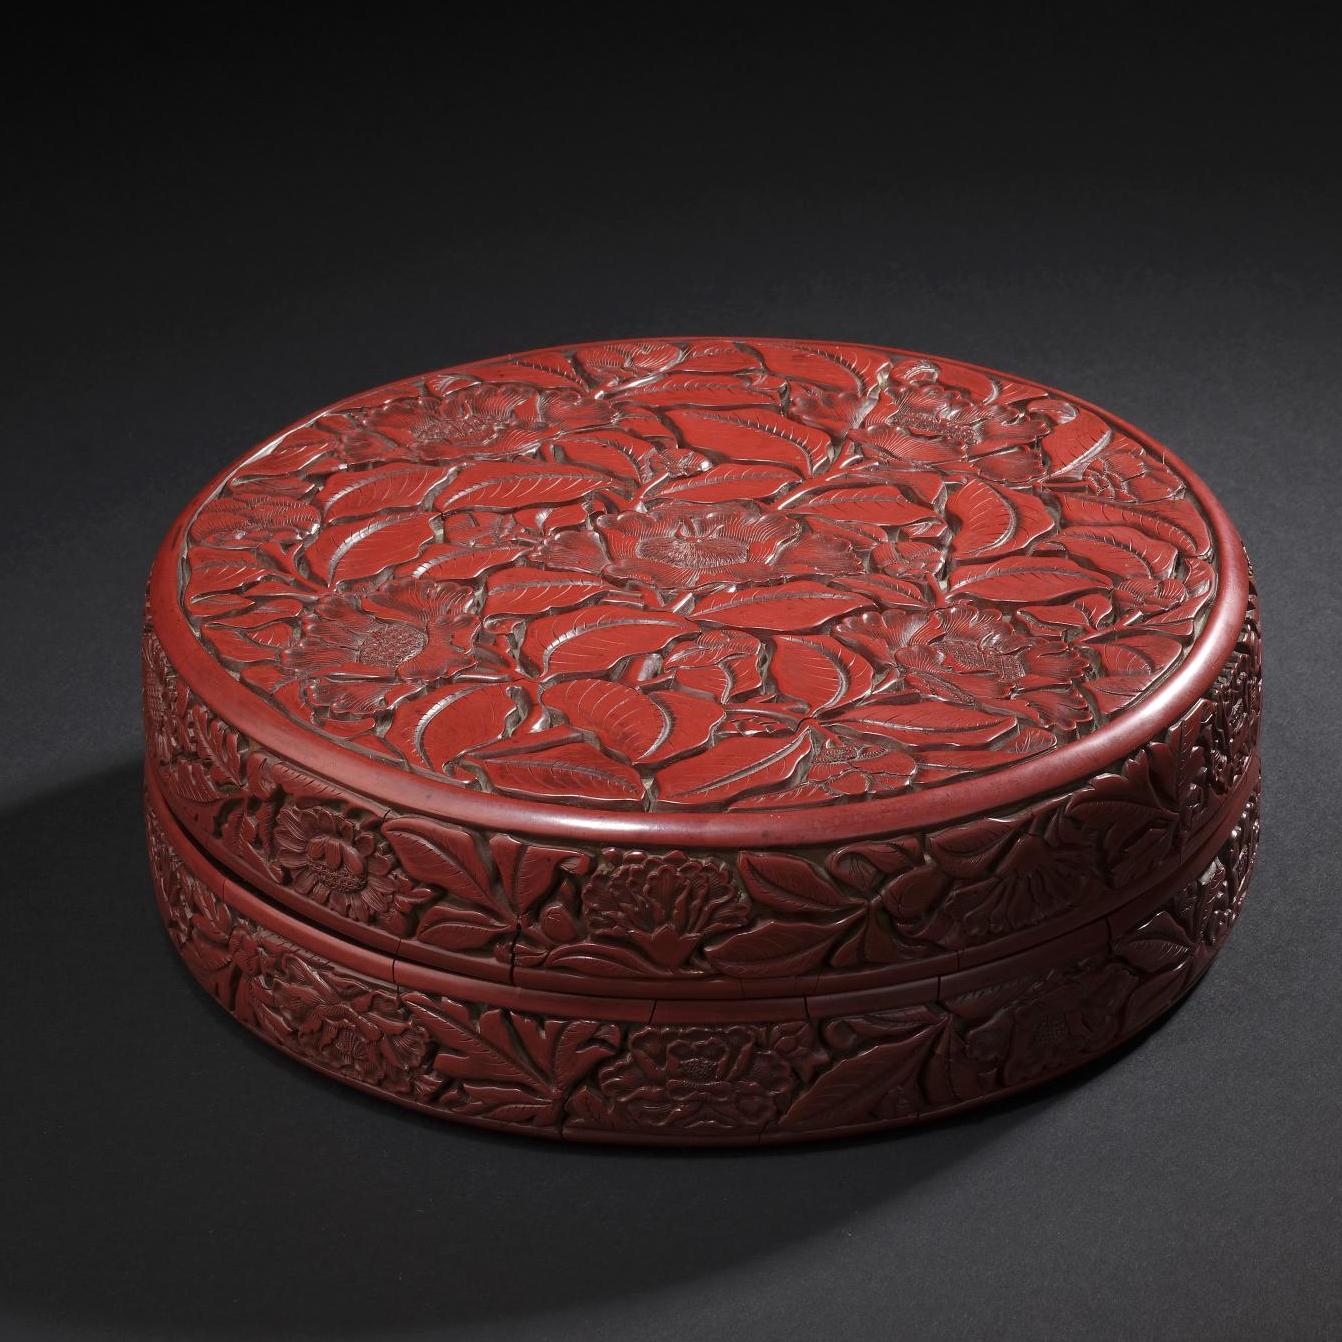 The Art of Lacquer Under Emperor Yongle: €2,060,800 - Lots sold